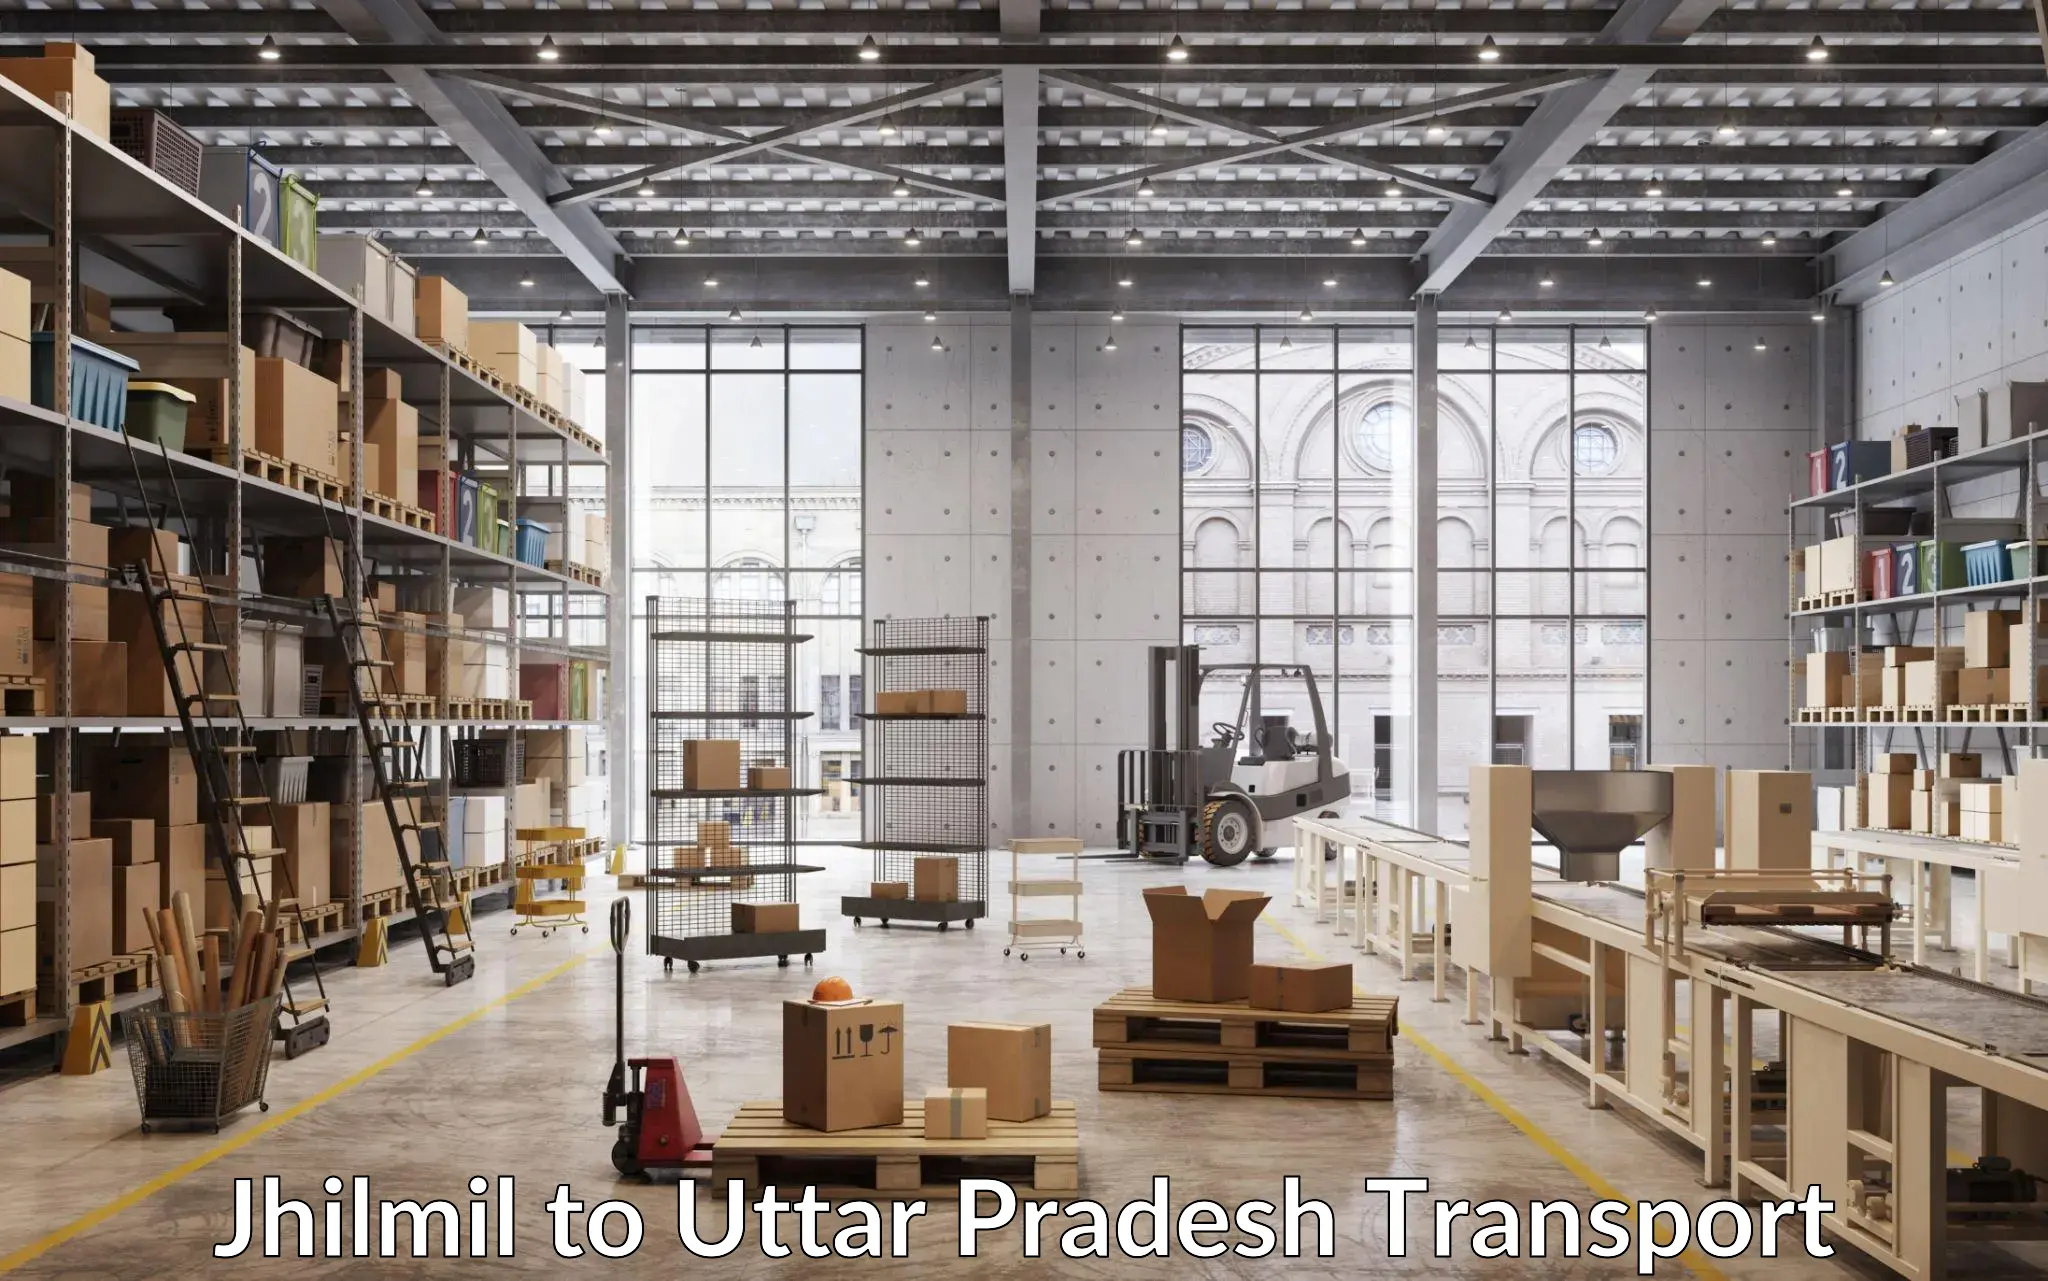 Land transport services Jhilmil to Sultanpur